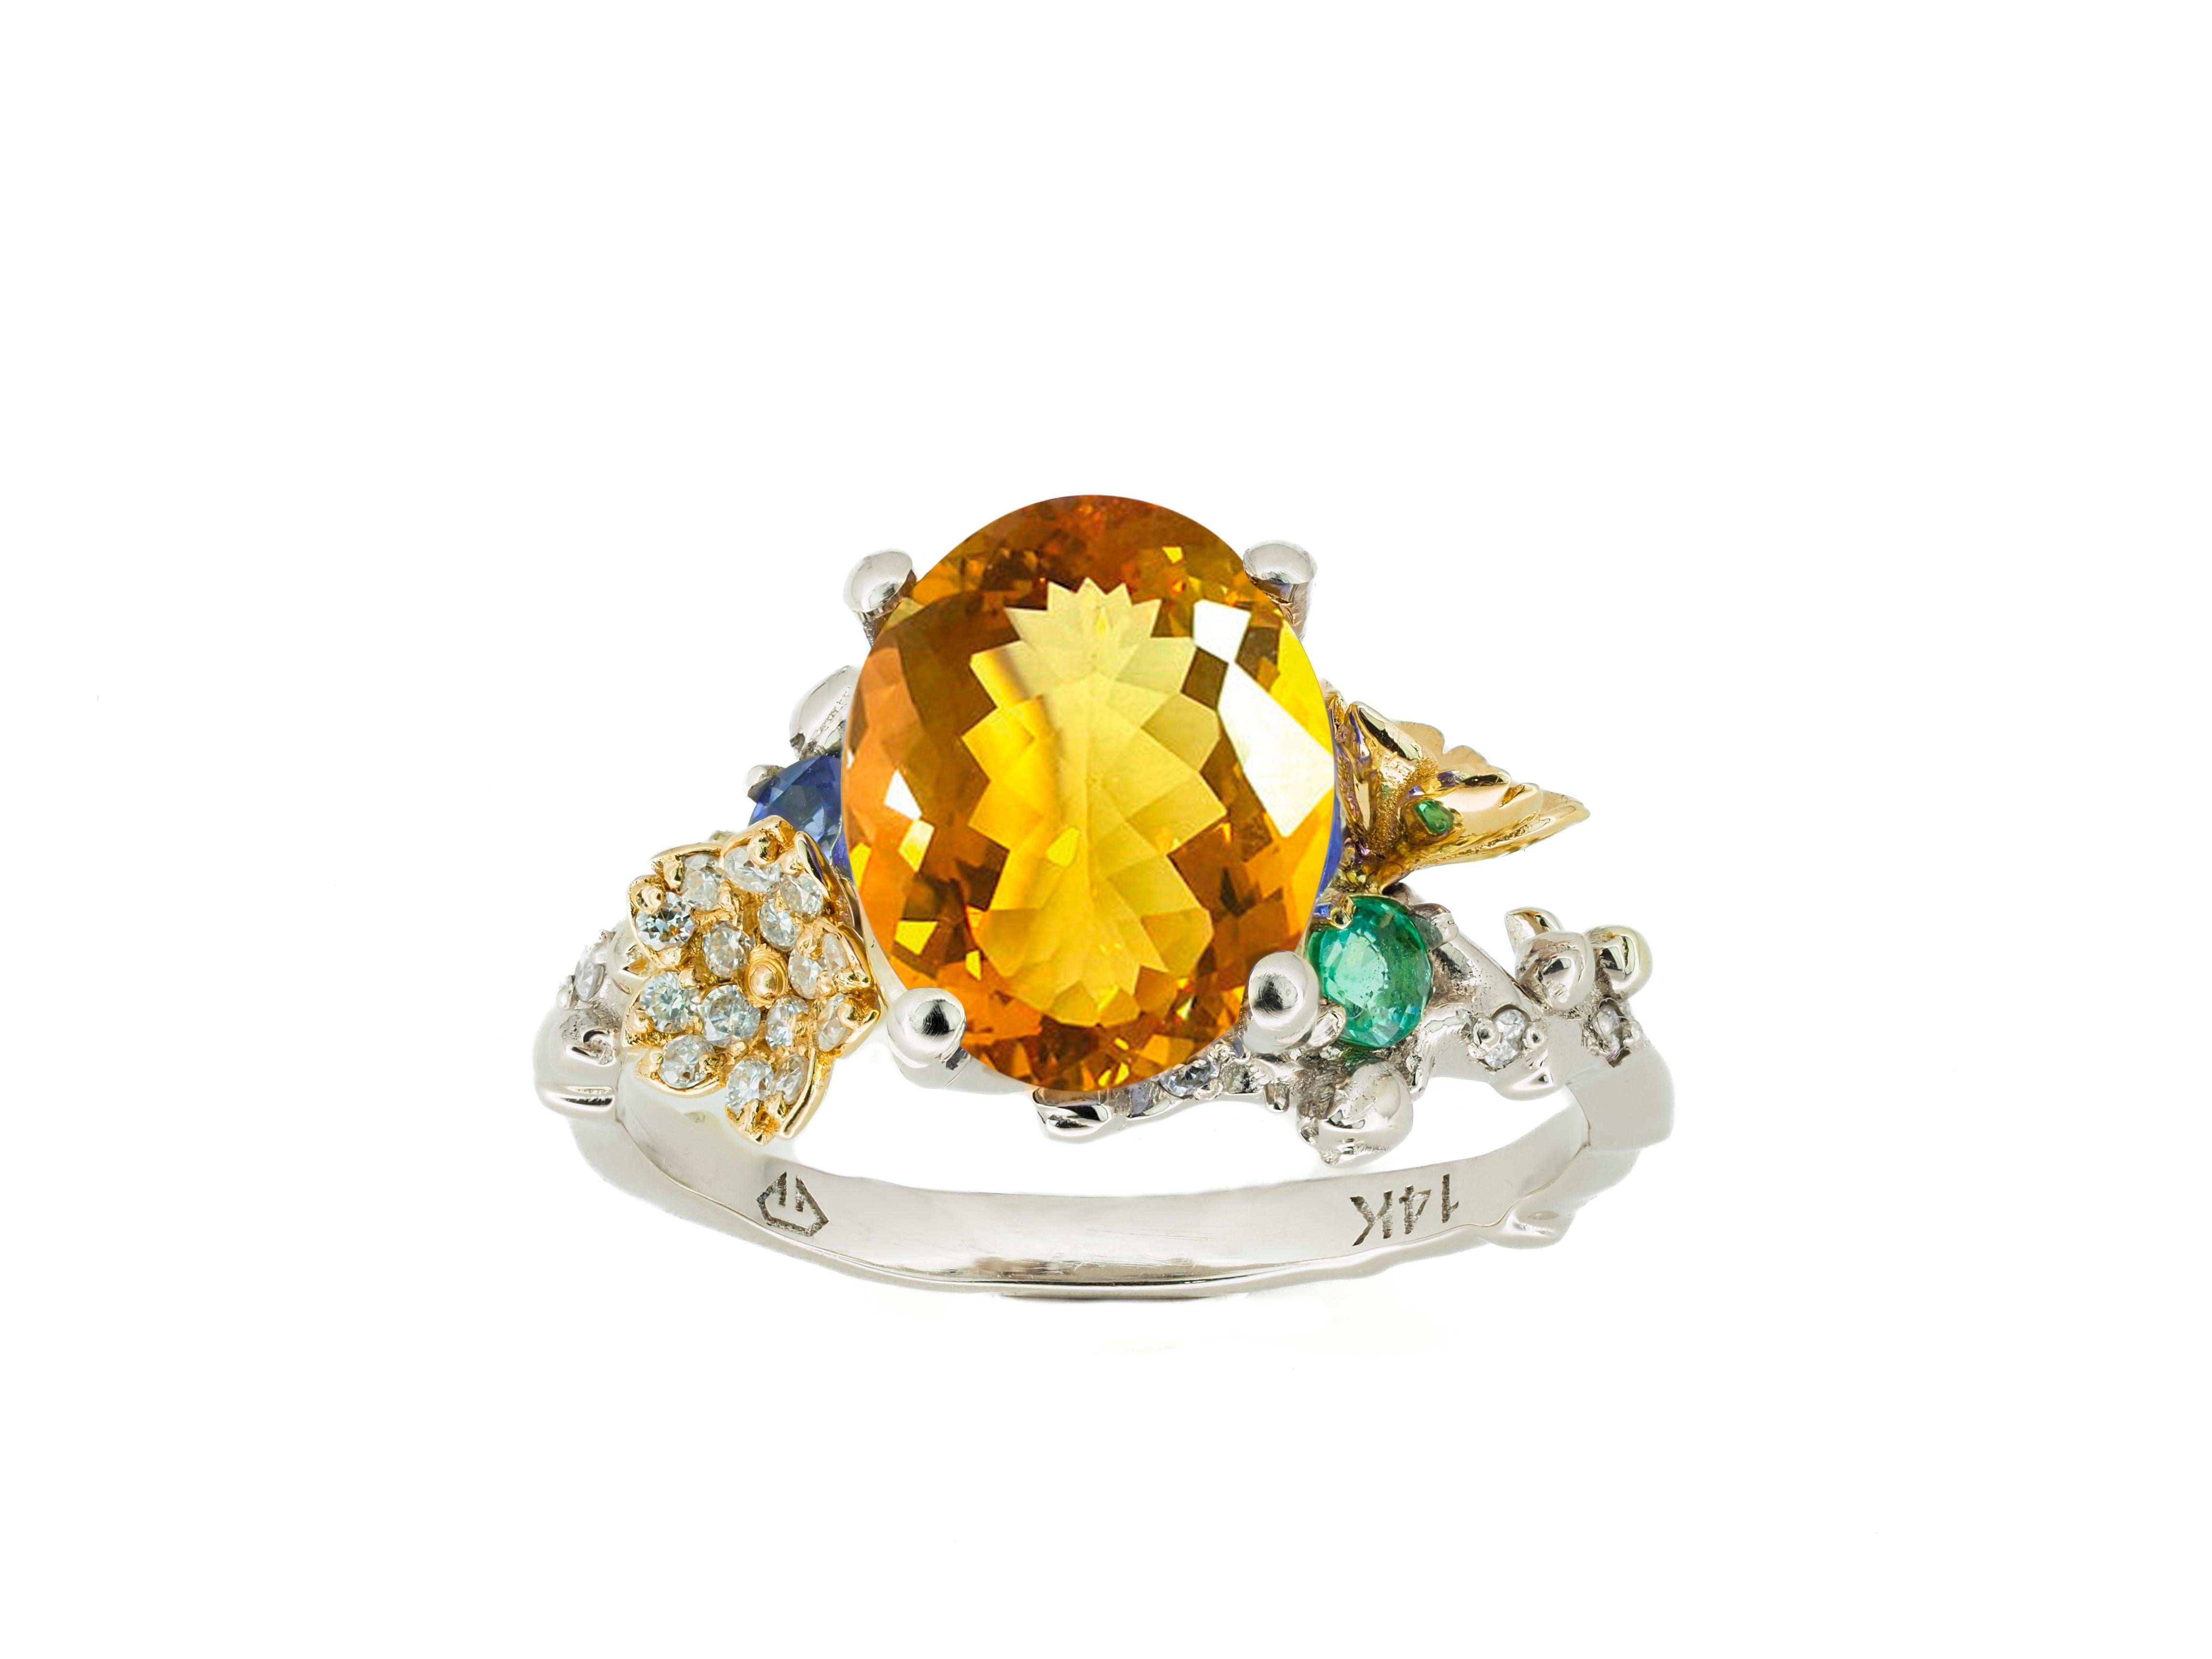 Citrine 14k gold ring. 
Genuine Citrine ring. Citrine gold ring. Oval Citrine ring. Citrine, diamonds, emerald 14k gold ring.

Metal: 14k gold : yellow and white.
Weight: 3.85 gr depends from size.

Central stone natural Citrine
Weight: approx 4.5